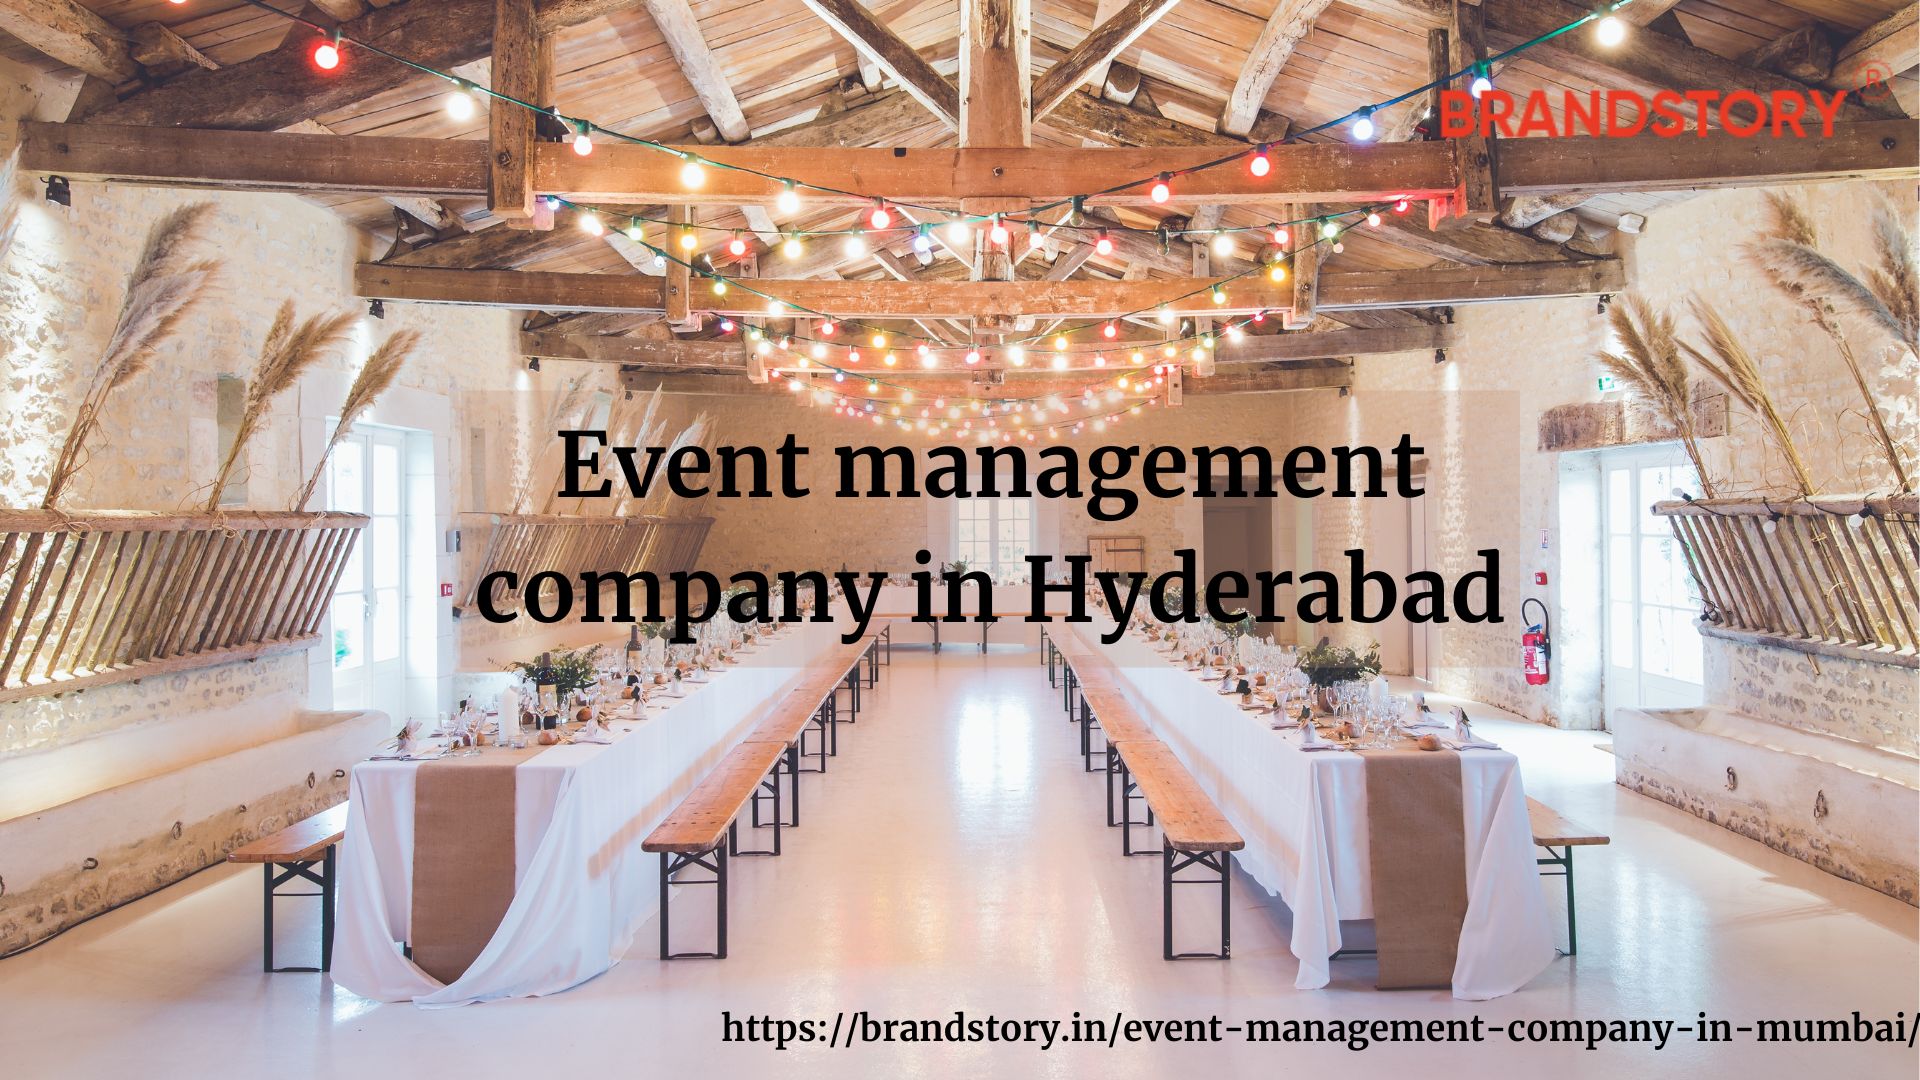 Event management company in Hyderabad-5939e618